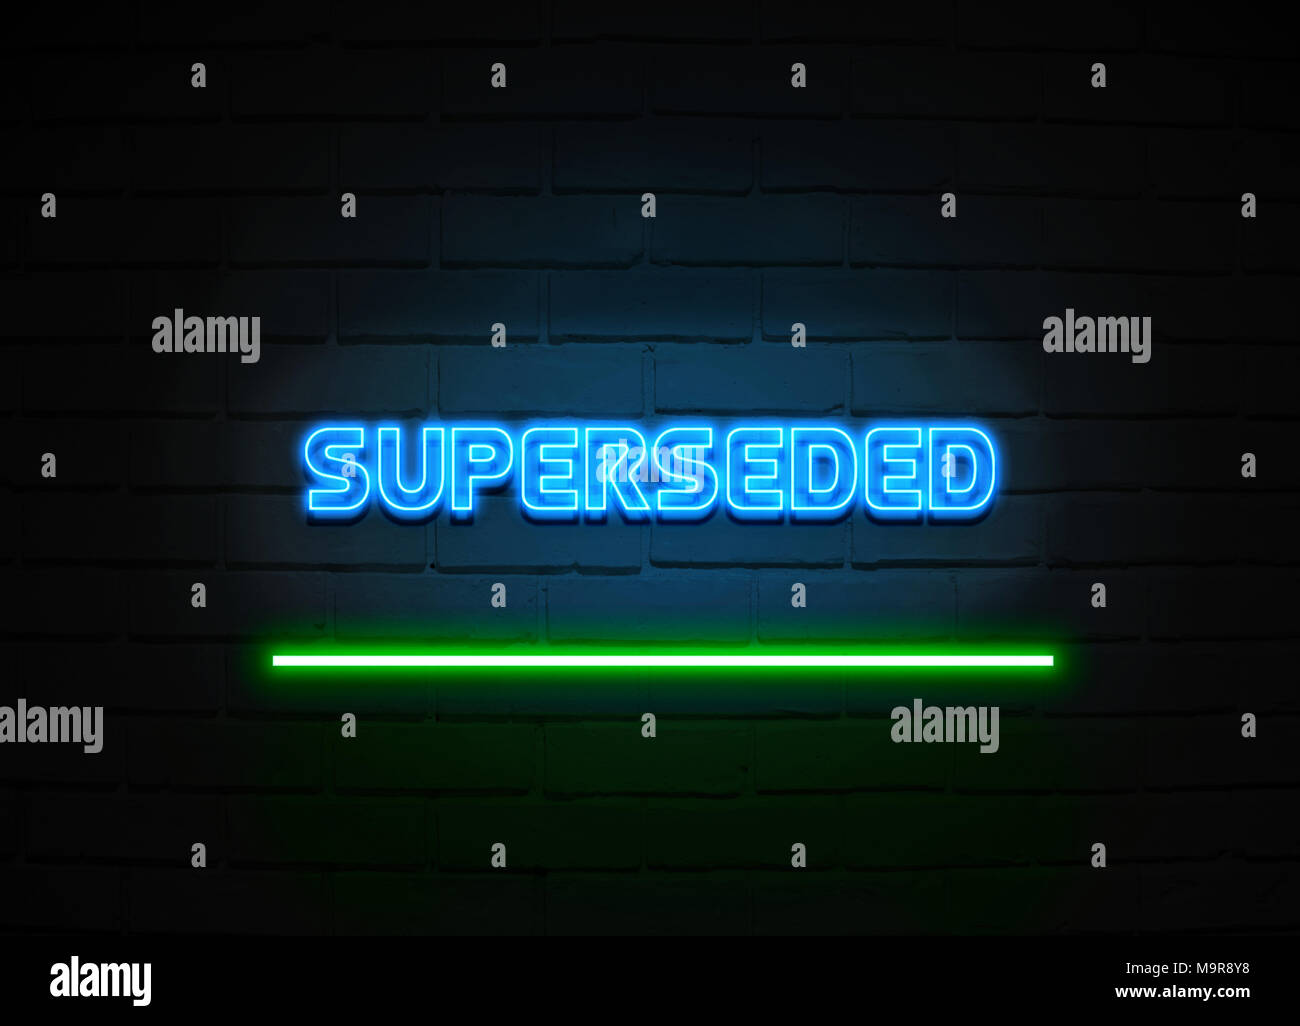 Superseded neon sign - Glowing Neon Sign on brickwall wall - 3D rendered royalty free stock illustration. Stock Photo